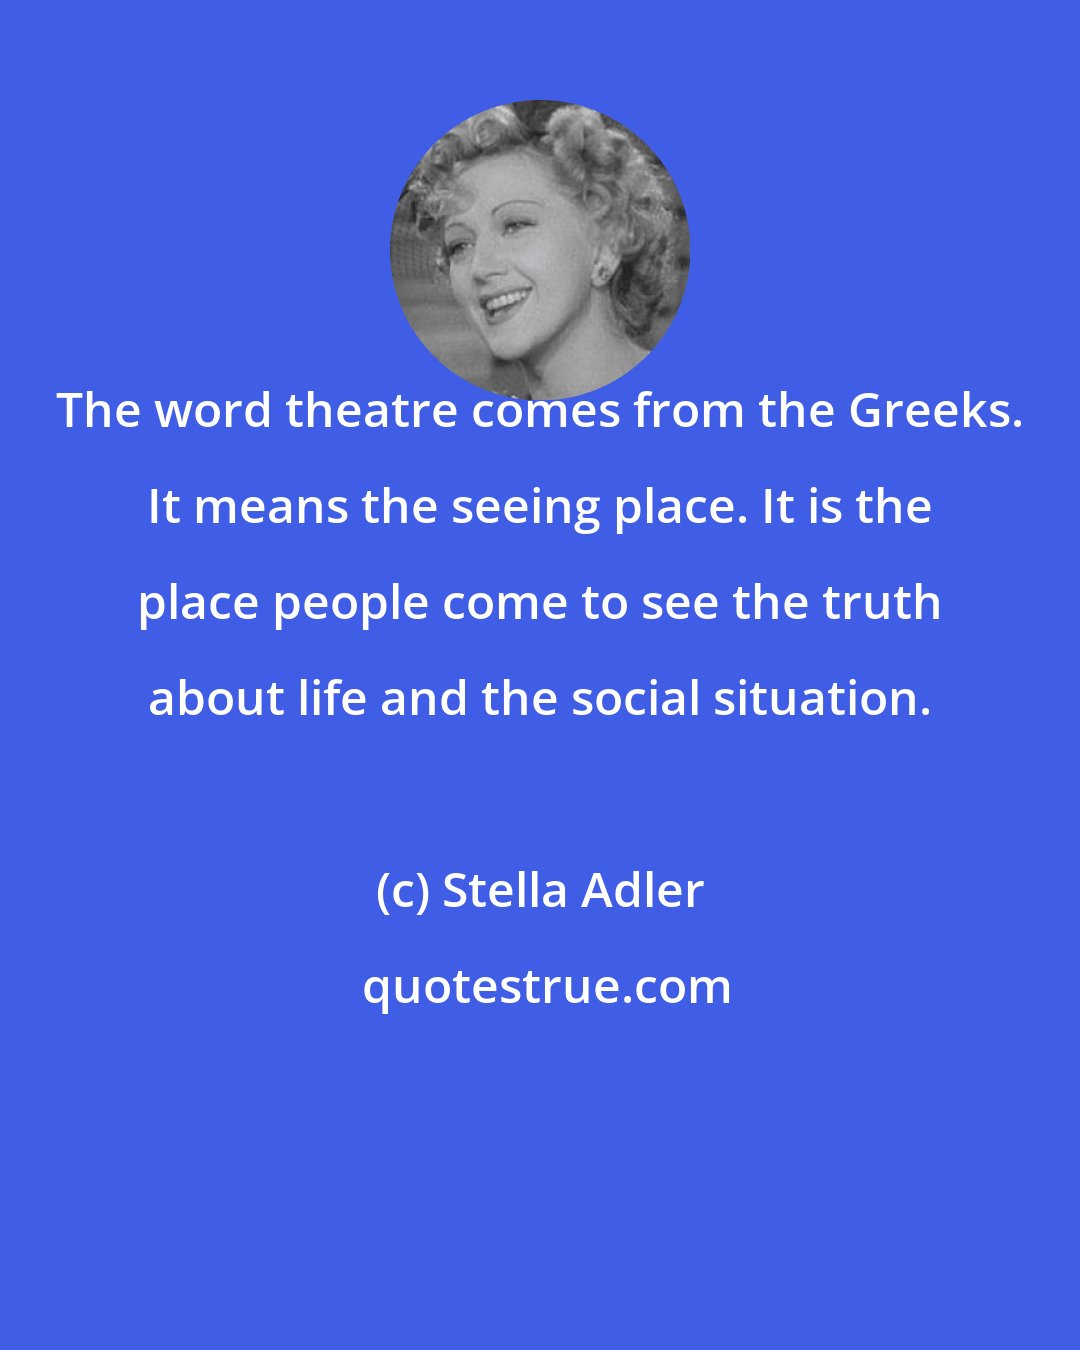 Stella Adler: The word theatre comes from the Greeks. It means the seeing place. It is the place people come to see the truth about life and the social situation.